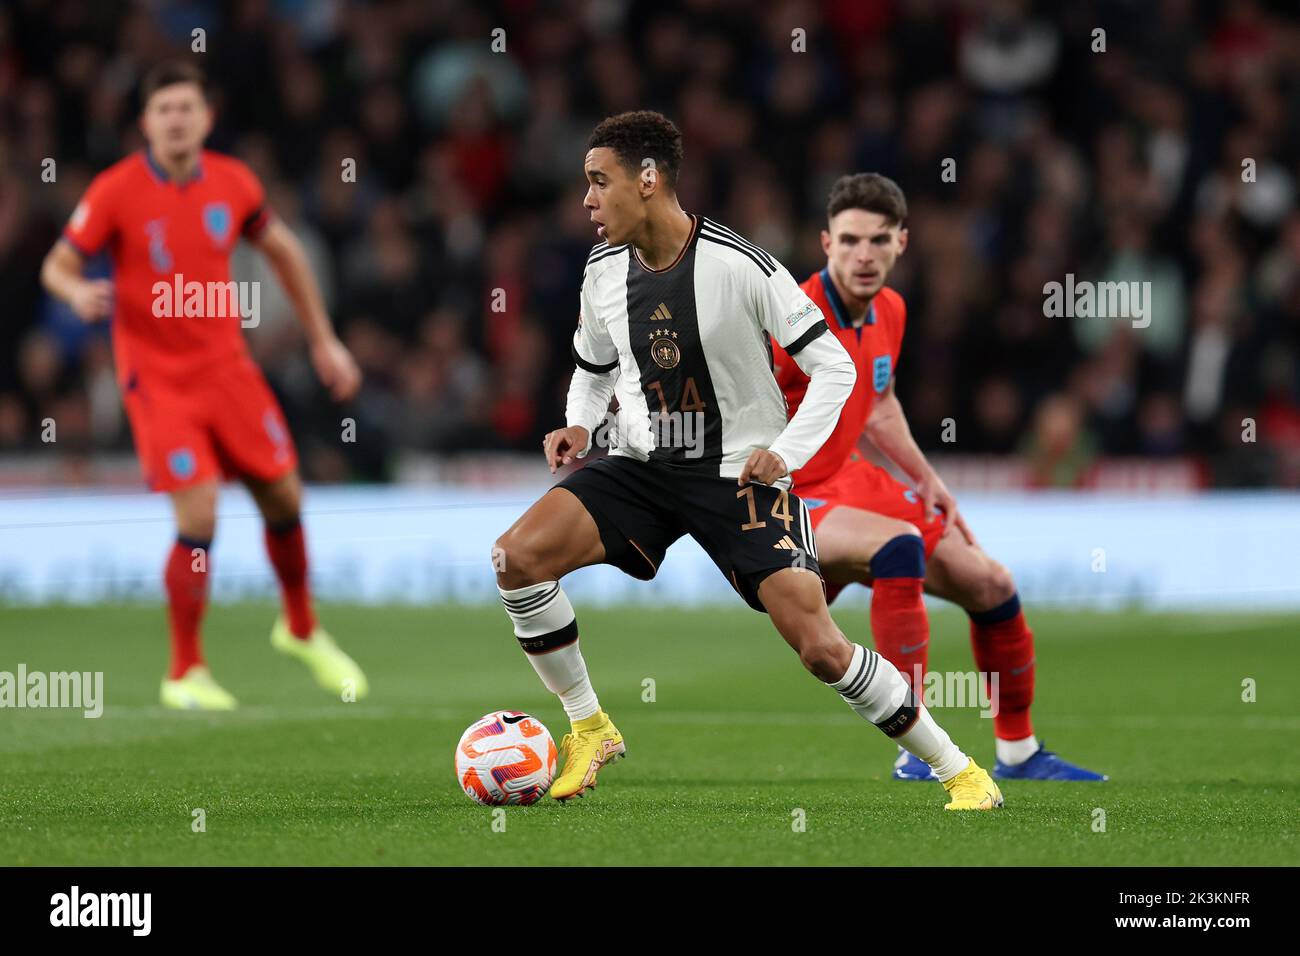 London, UK. 26th Sep, 2022. Jamal Musiala of Germany holds off Declan Rice of England. England v Germany, UEFA Nations league International group C match at Wembley Stadium in London on Monday 26th September 2022. Editorial use only. pic by Andrew Orchard/Andrew Orchard sports photography/Alamy Live News Credit: Andrew Orchard sports photography/Alamy Live News Stock Photo